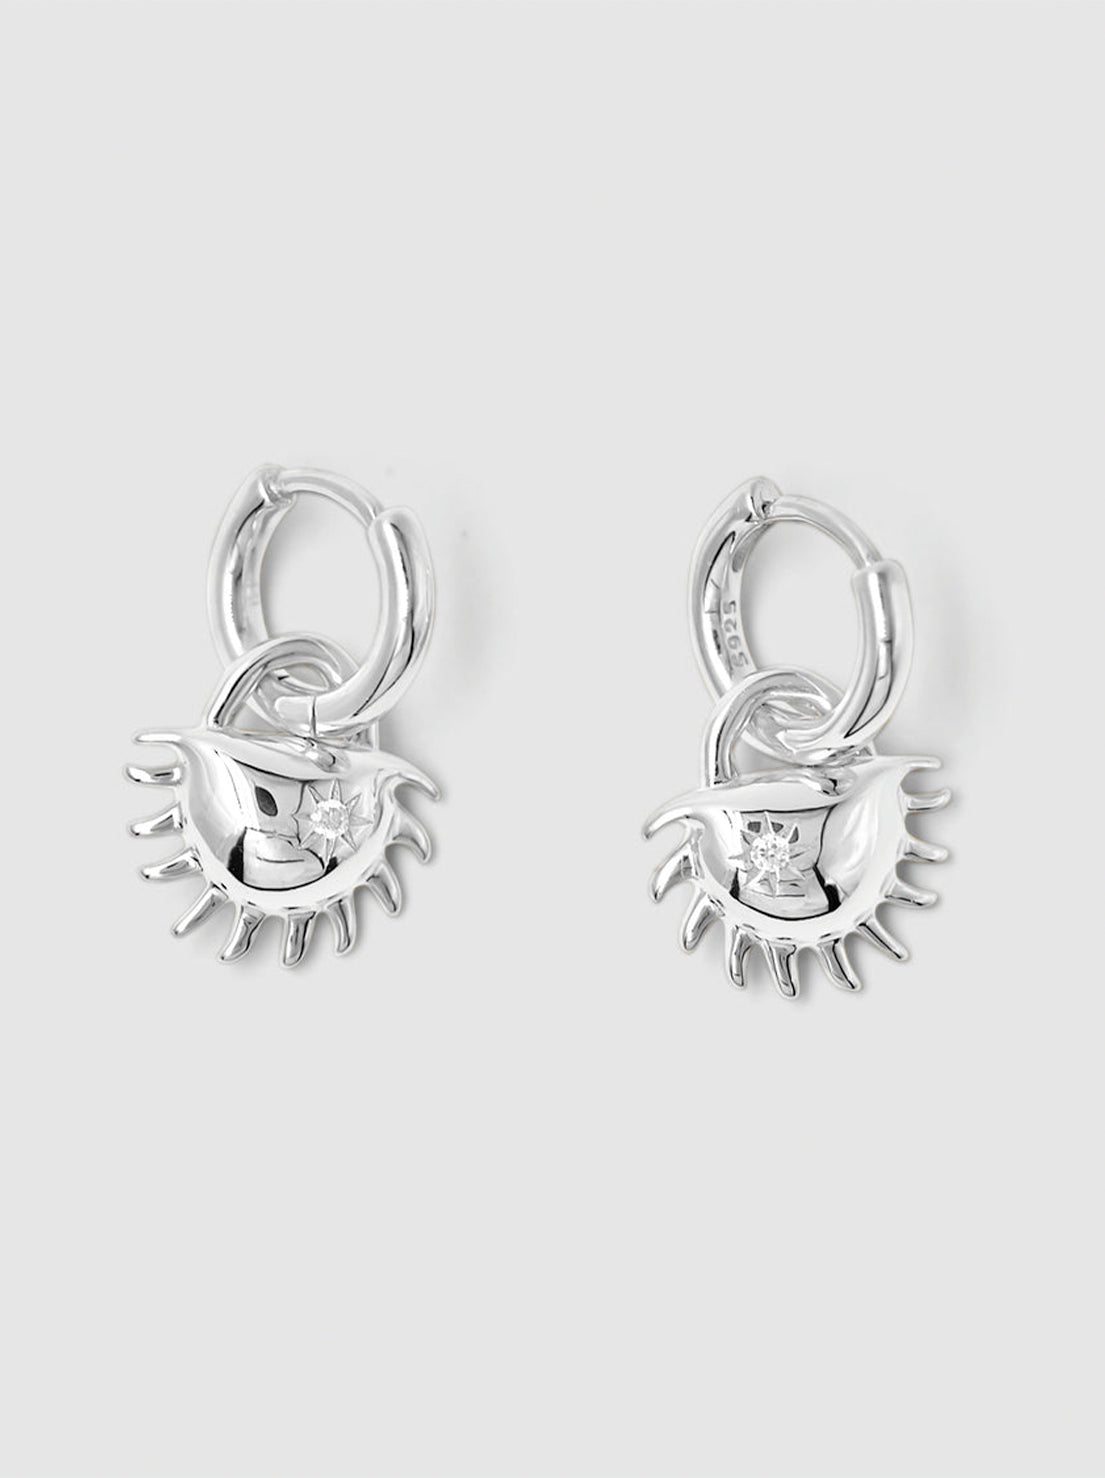 Brie Leon - Solida Charm Earrings - Silver/Clear